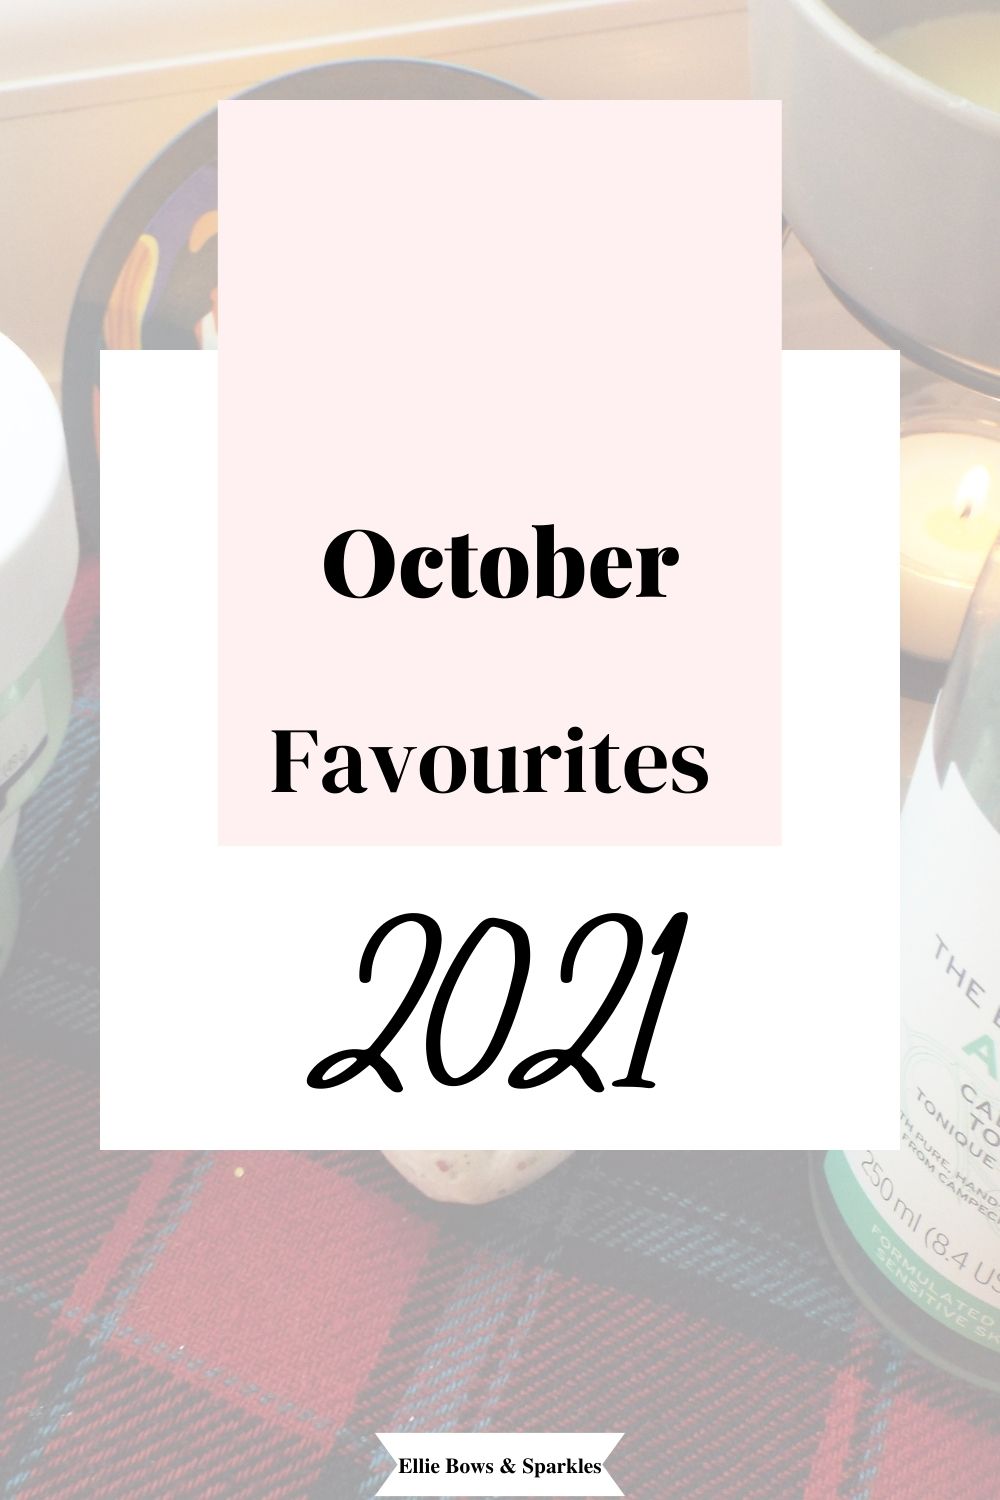 Pinterest pin with faded background image of October favourites flatlay and white square title card, with pink rectangle layered on top, housing the title October Favourites 2021, in black and handwritten font.